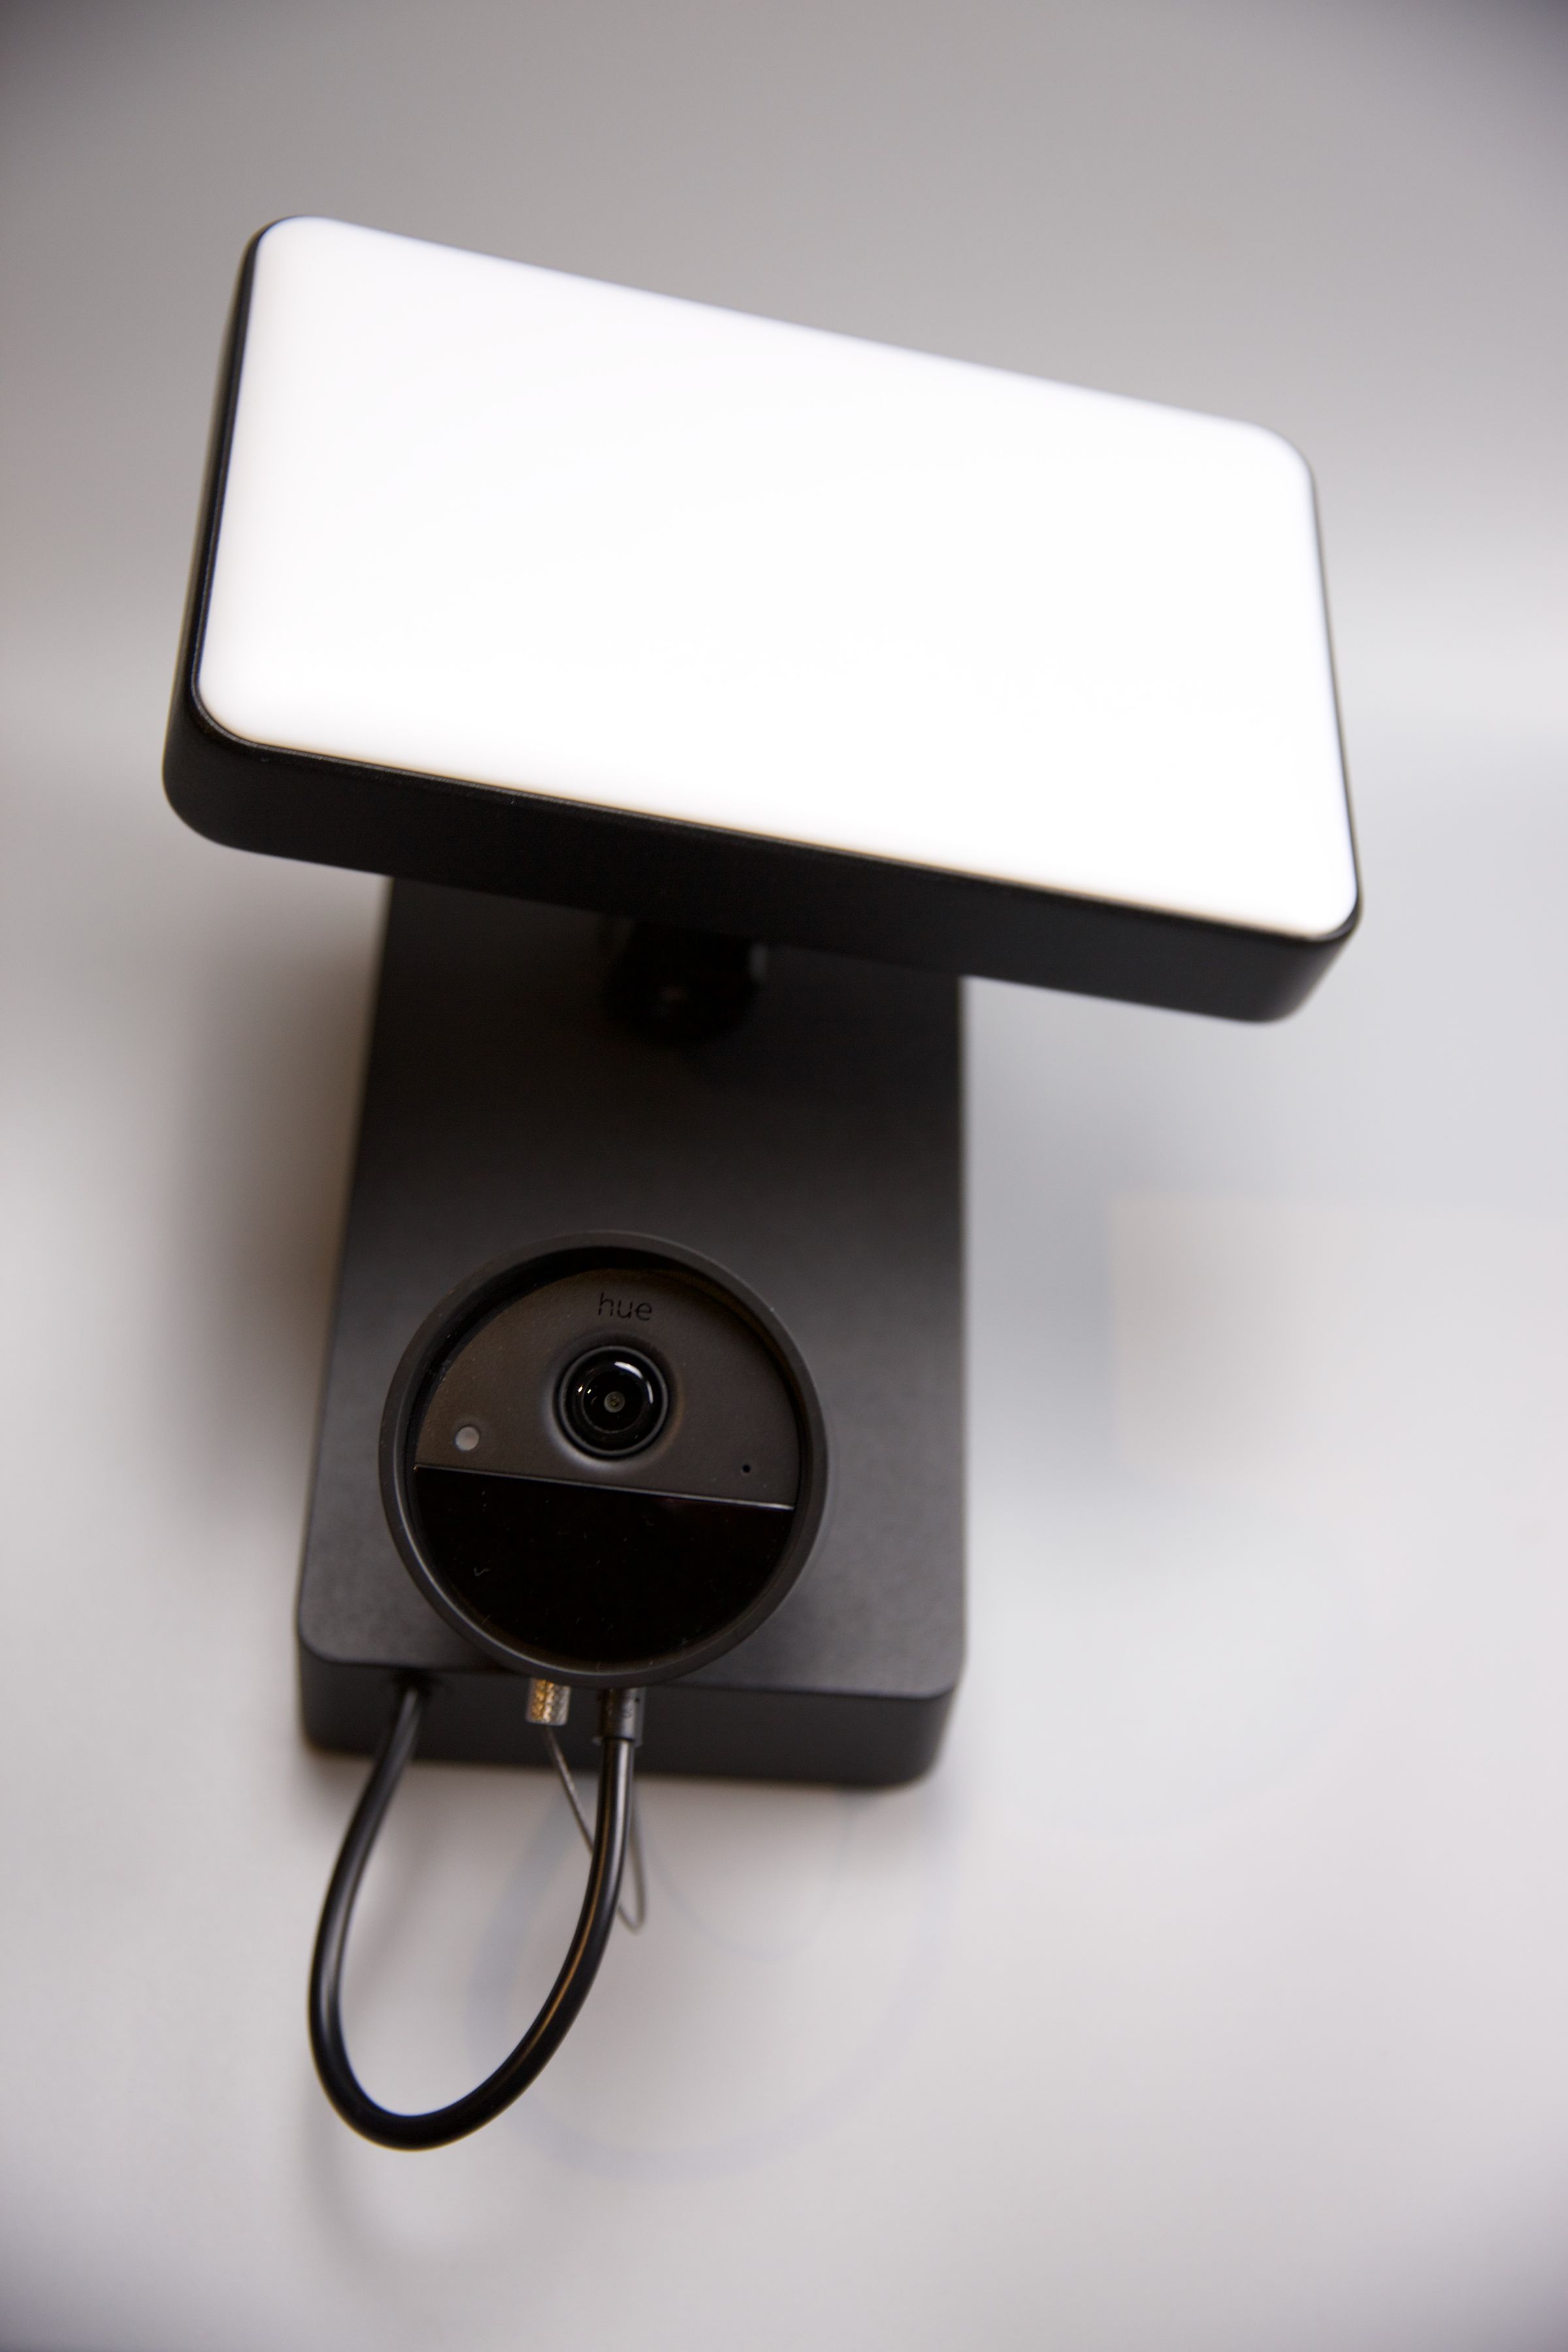 The floodlight camera is a Hue outdoor floodlight and a wired Hue Secure camera combined. 